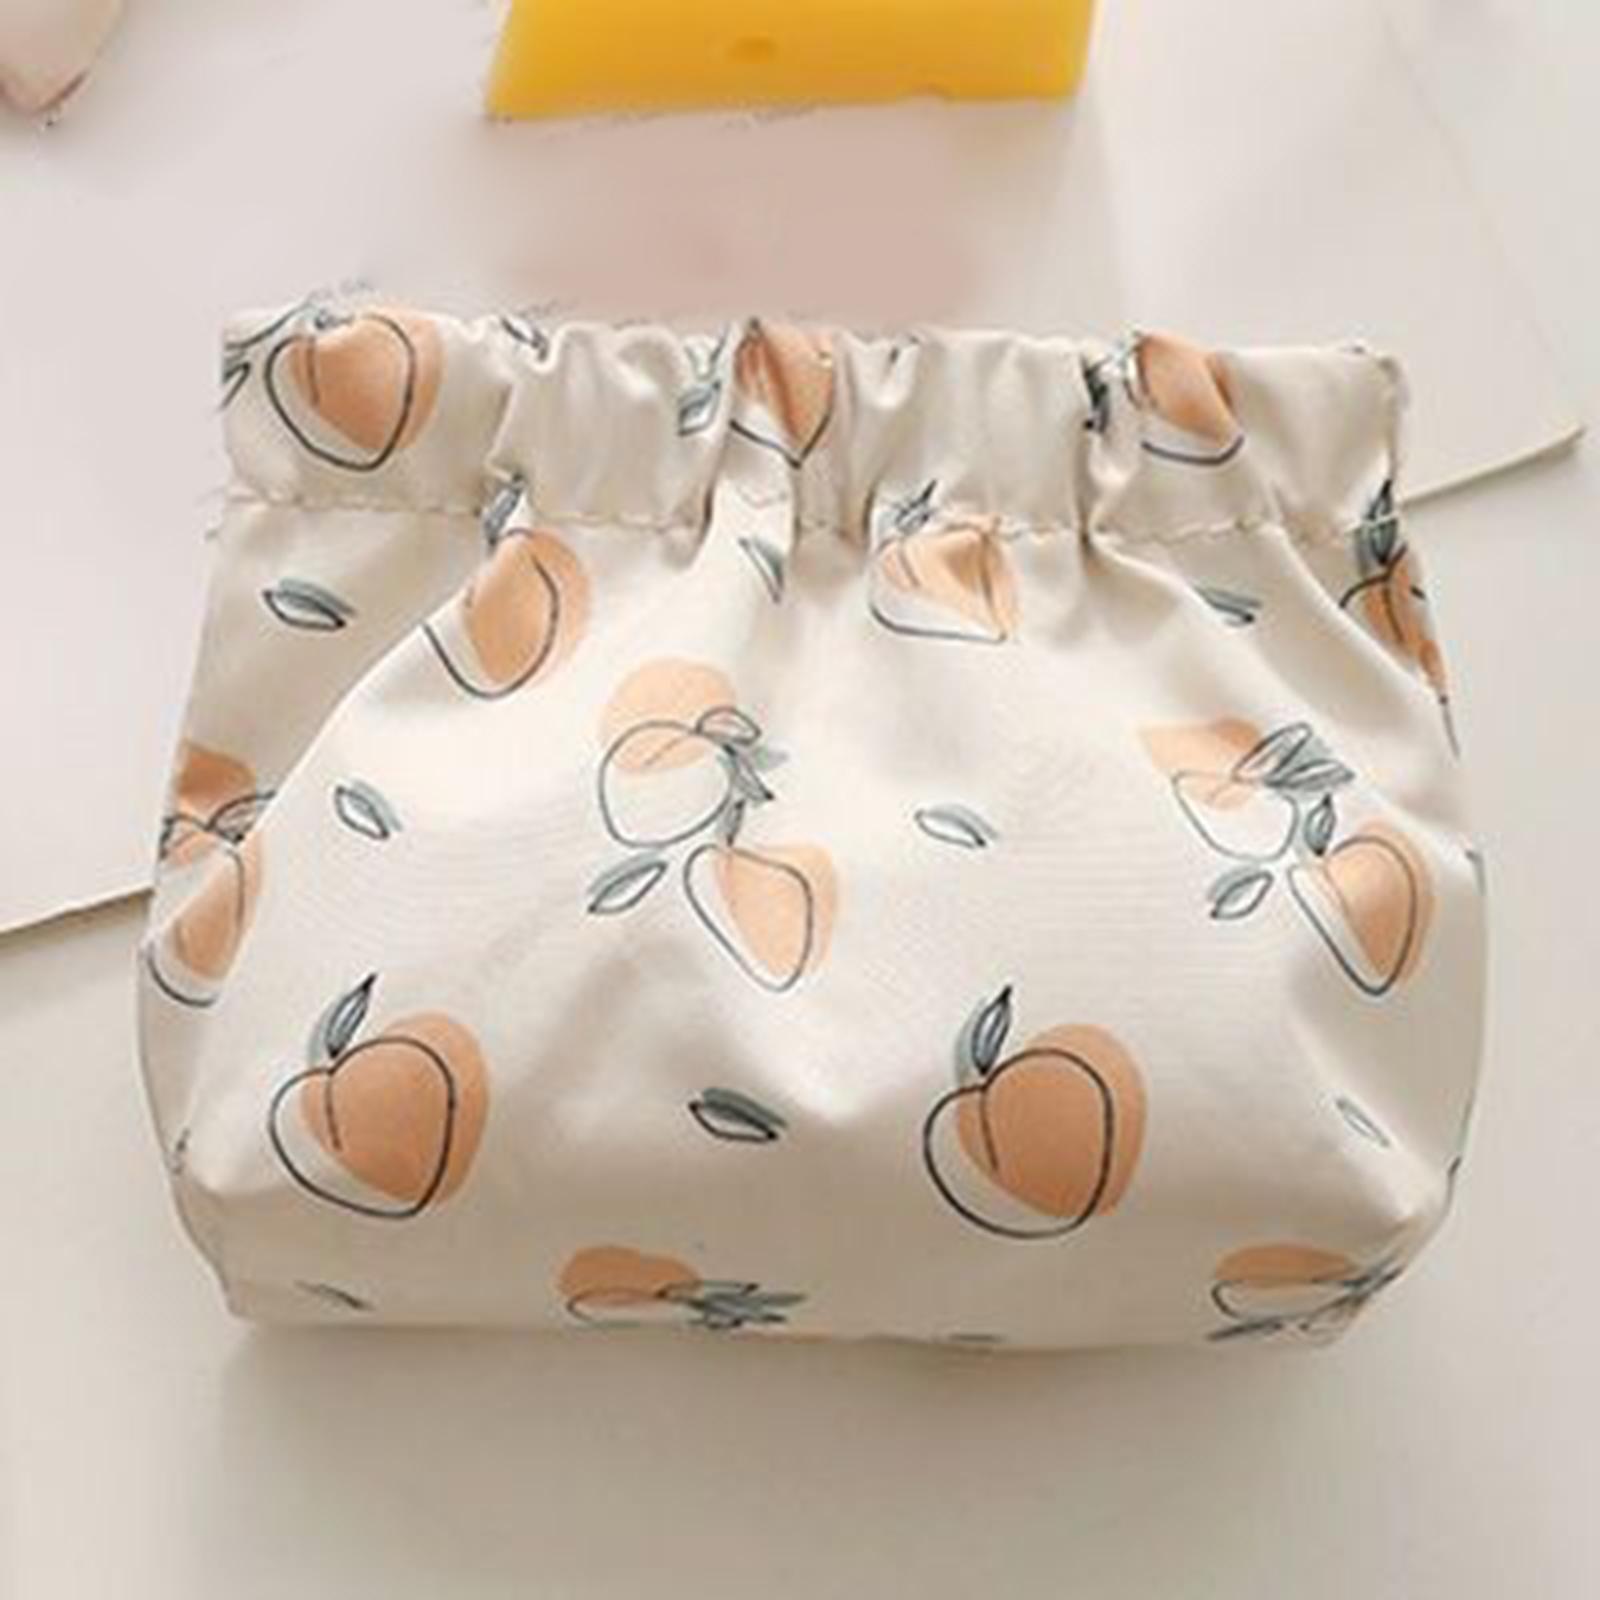 Makeup Pouch Water Resistant Large Capacity for Keys Women girls Use